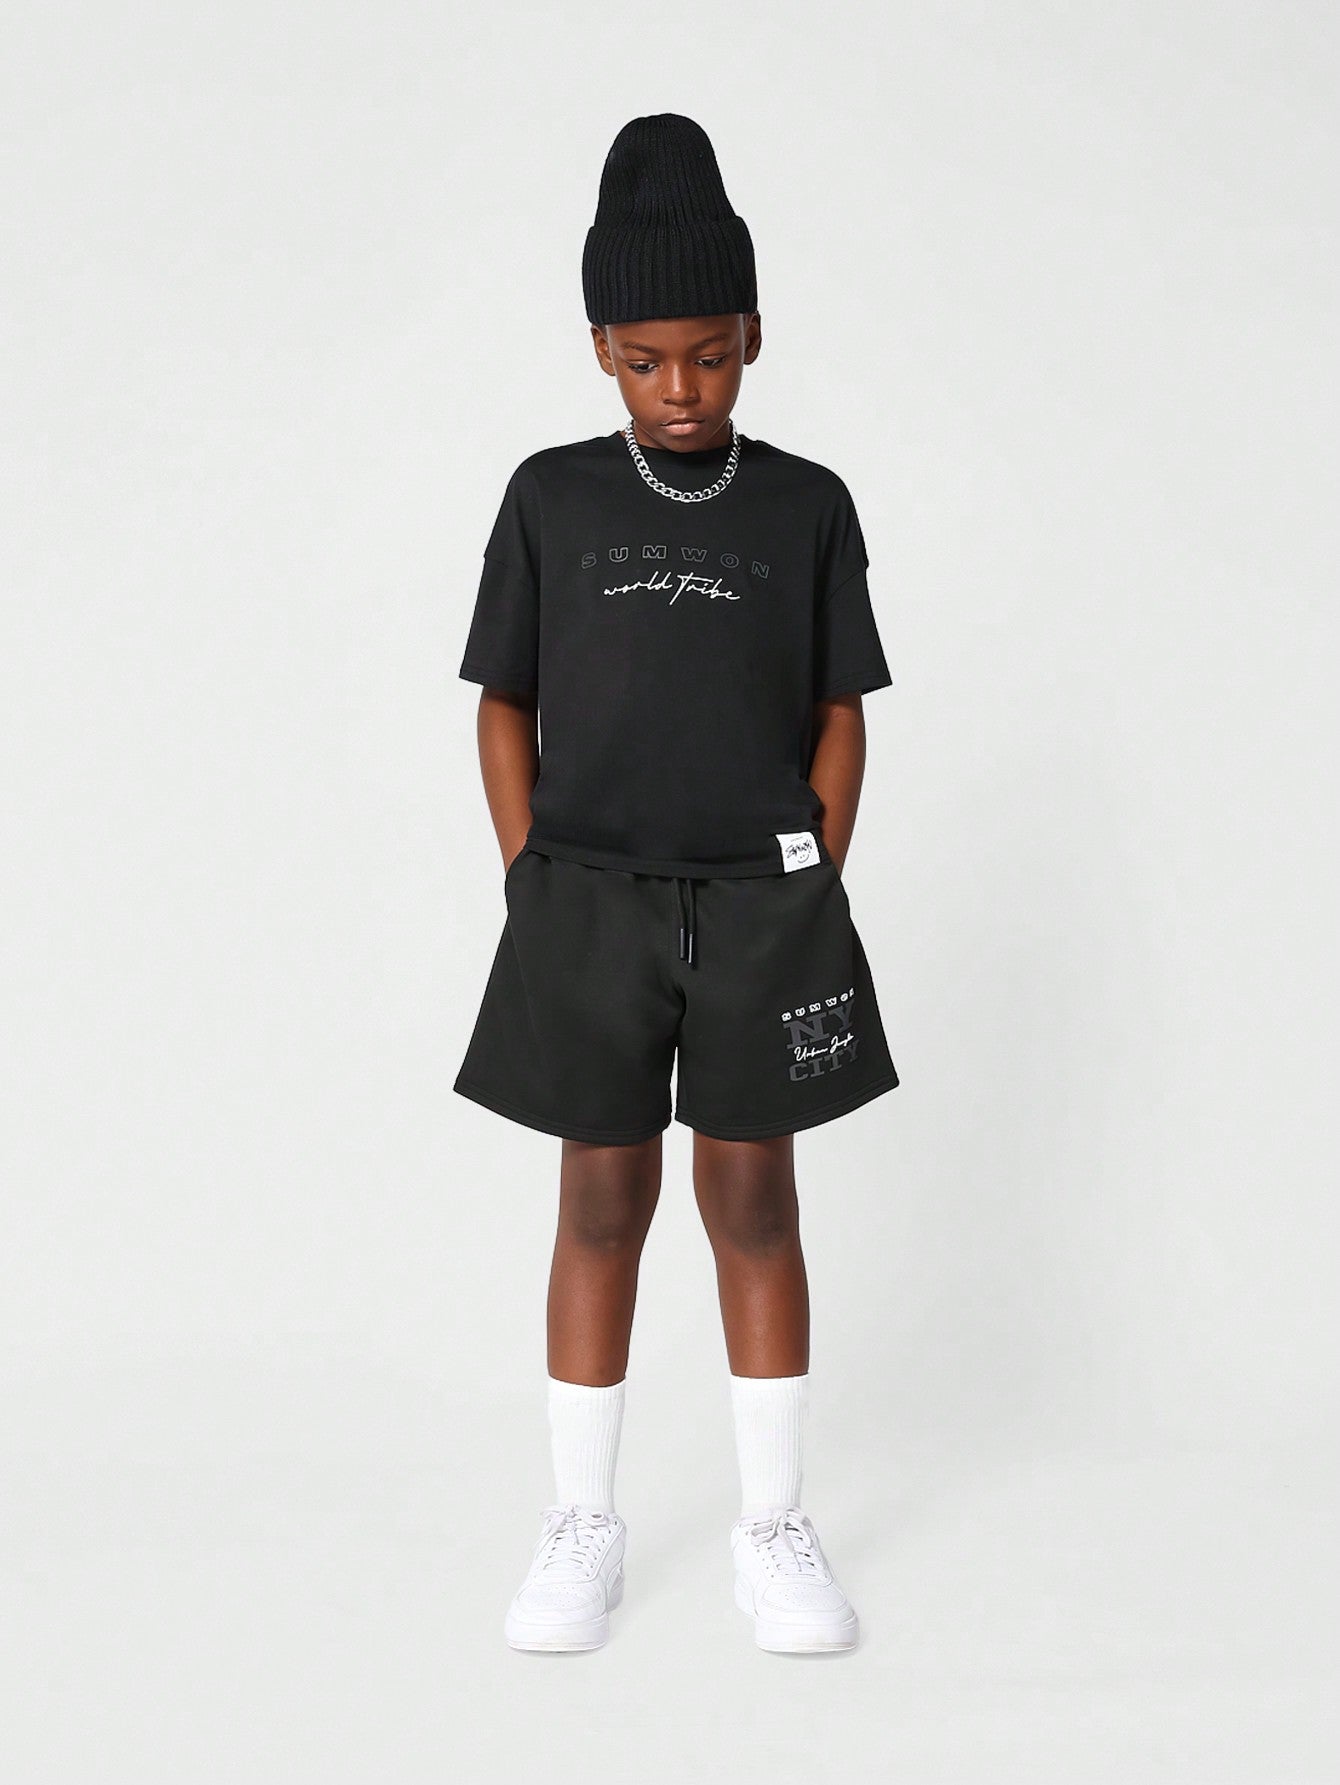 Kids Unisex Short With Reflective Print